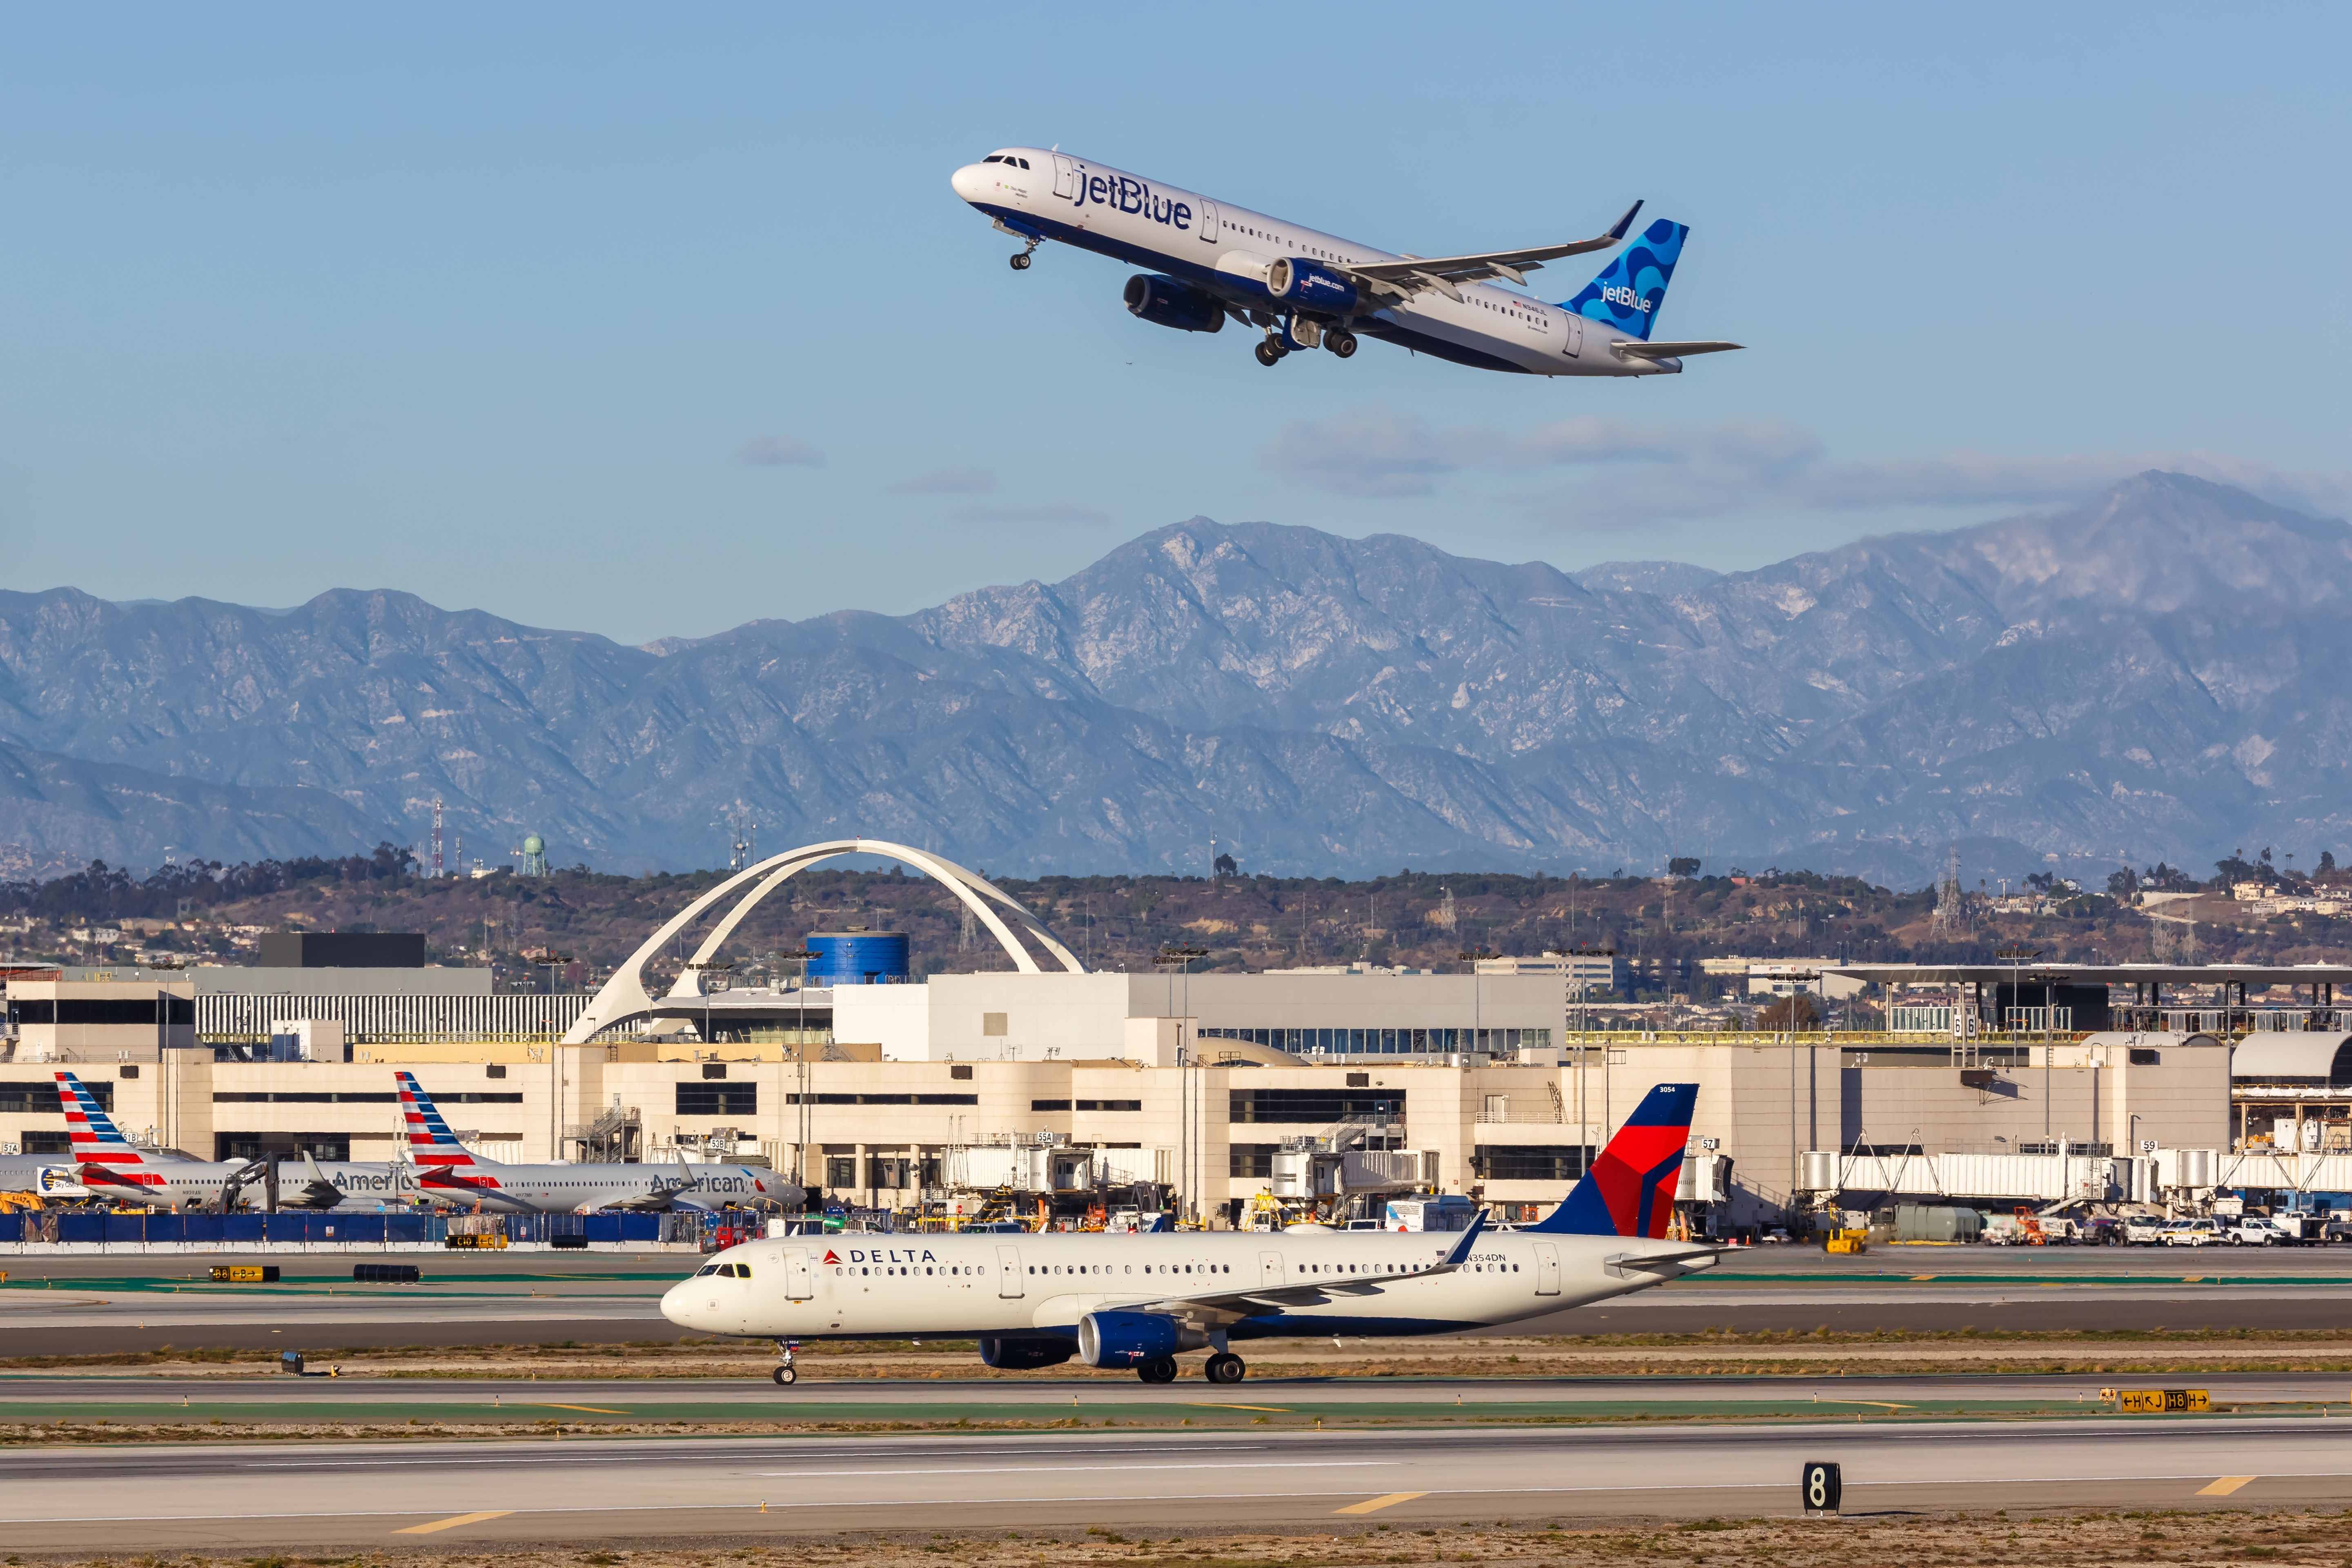 A Delta Air Lines Aircraft On a Taxiway Below a JetBlue Aircraft just after take off at Los Angeles Airport.